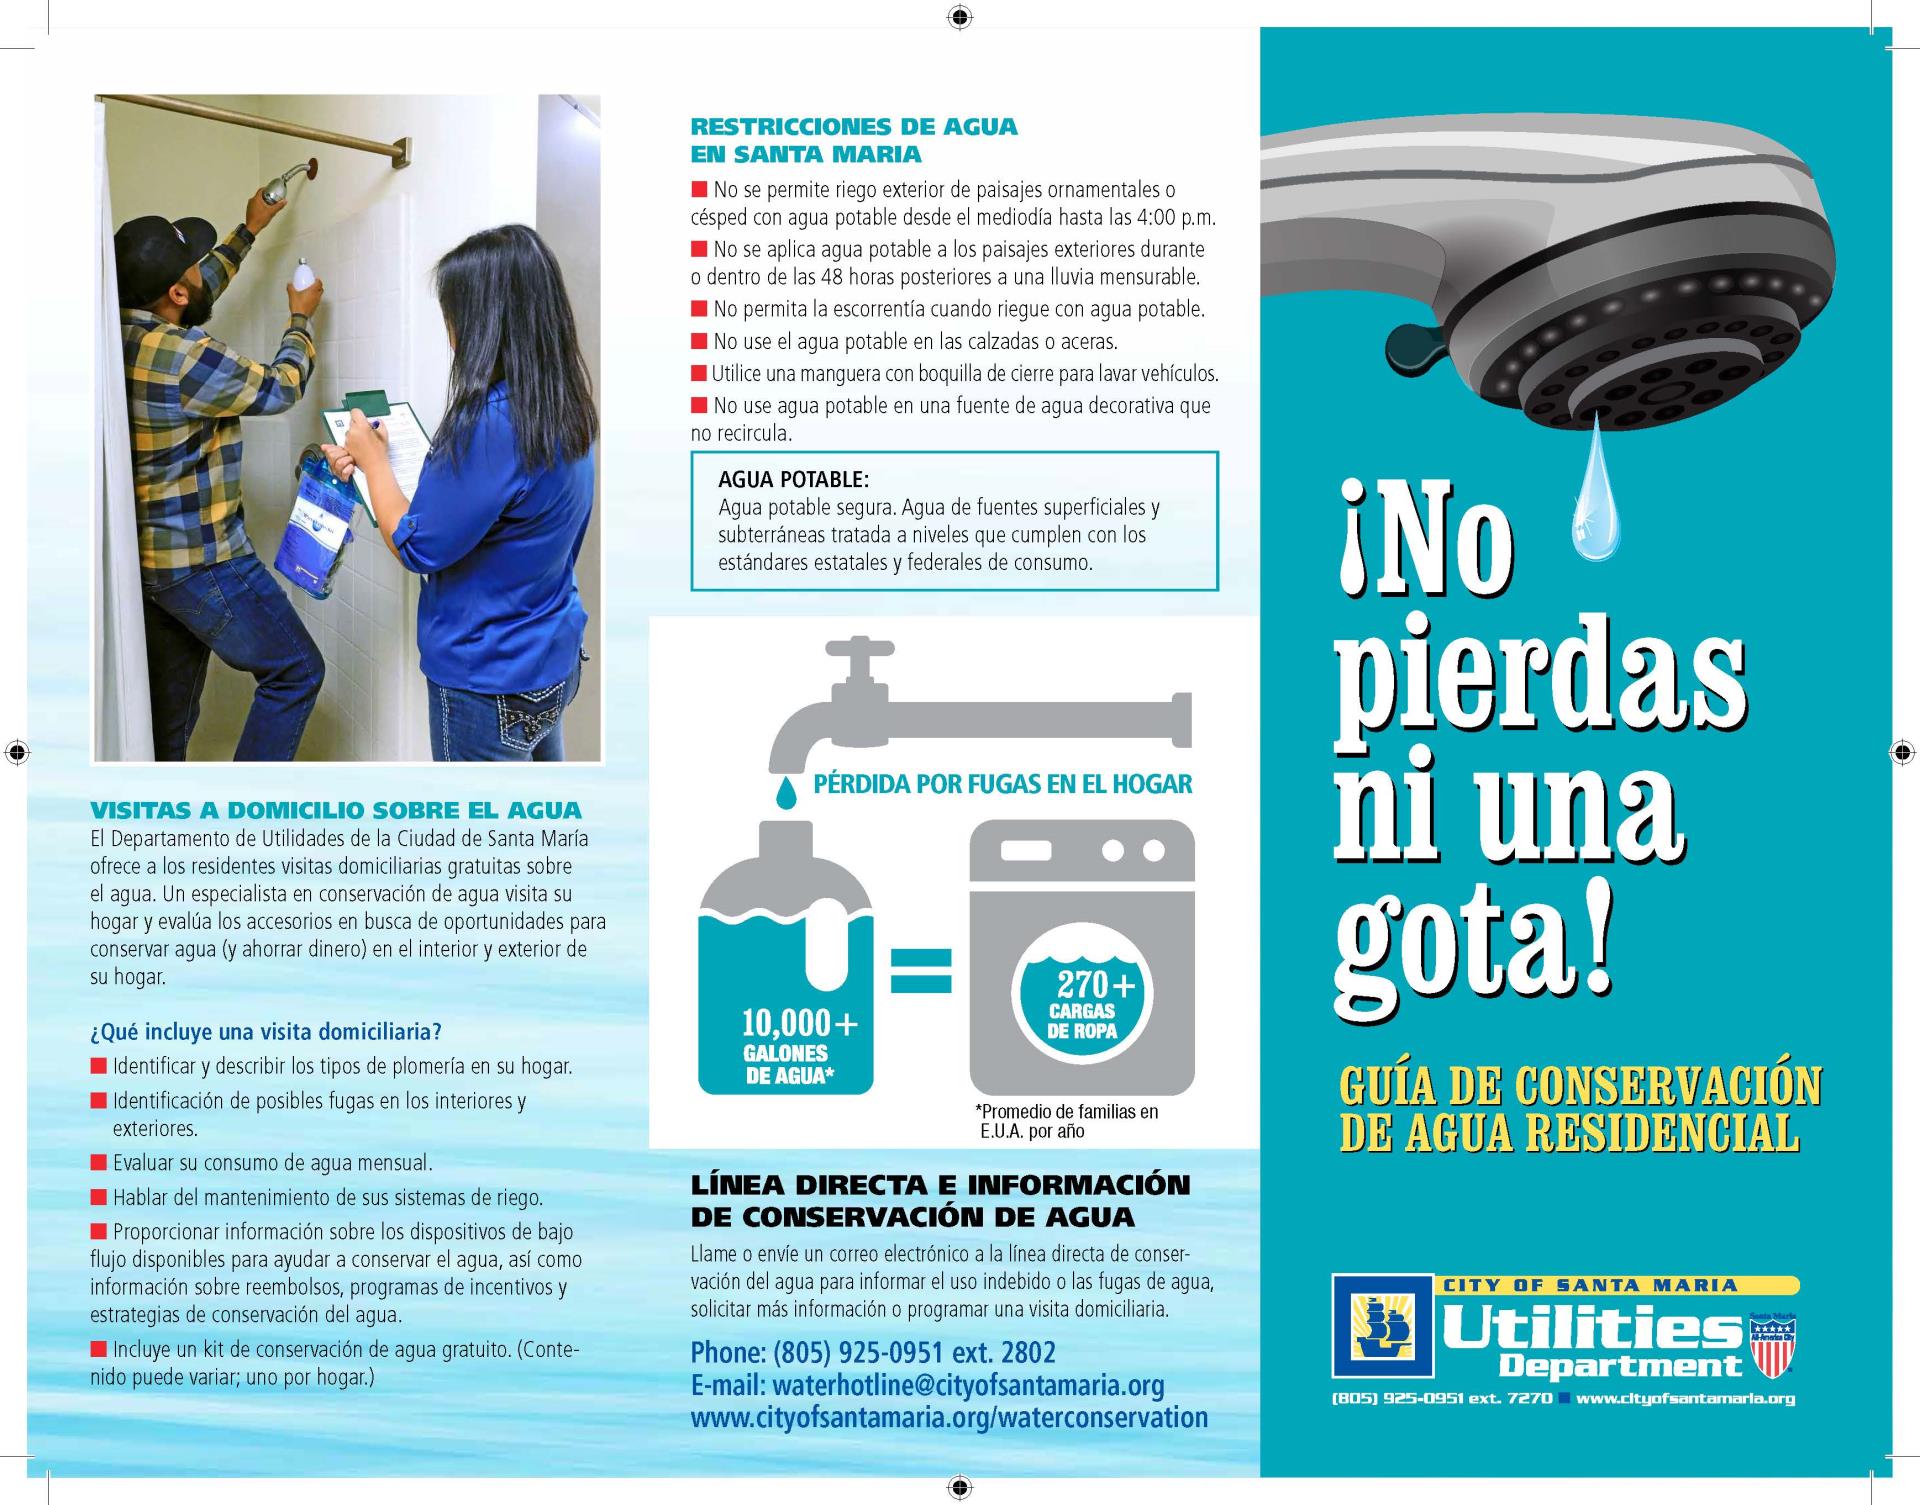 Spanish - Don't Waste a Drop brochure